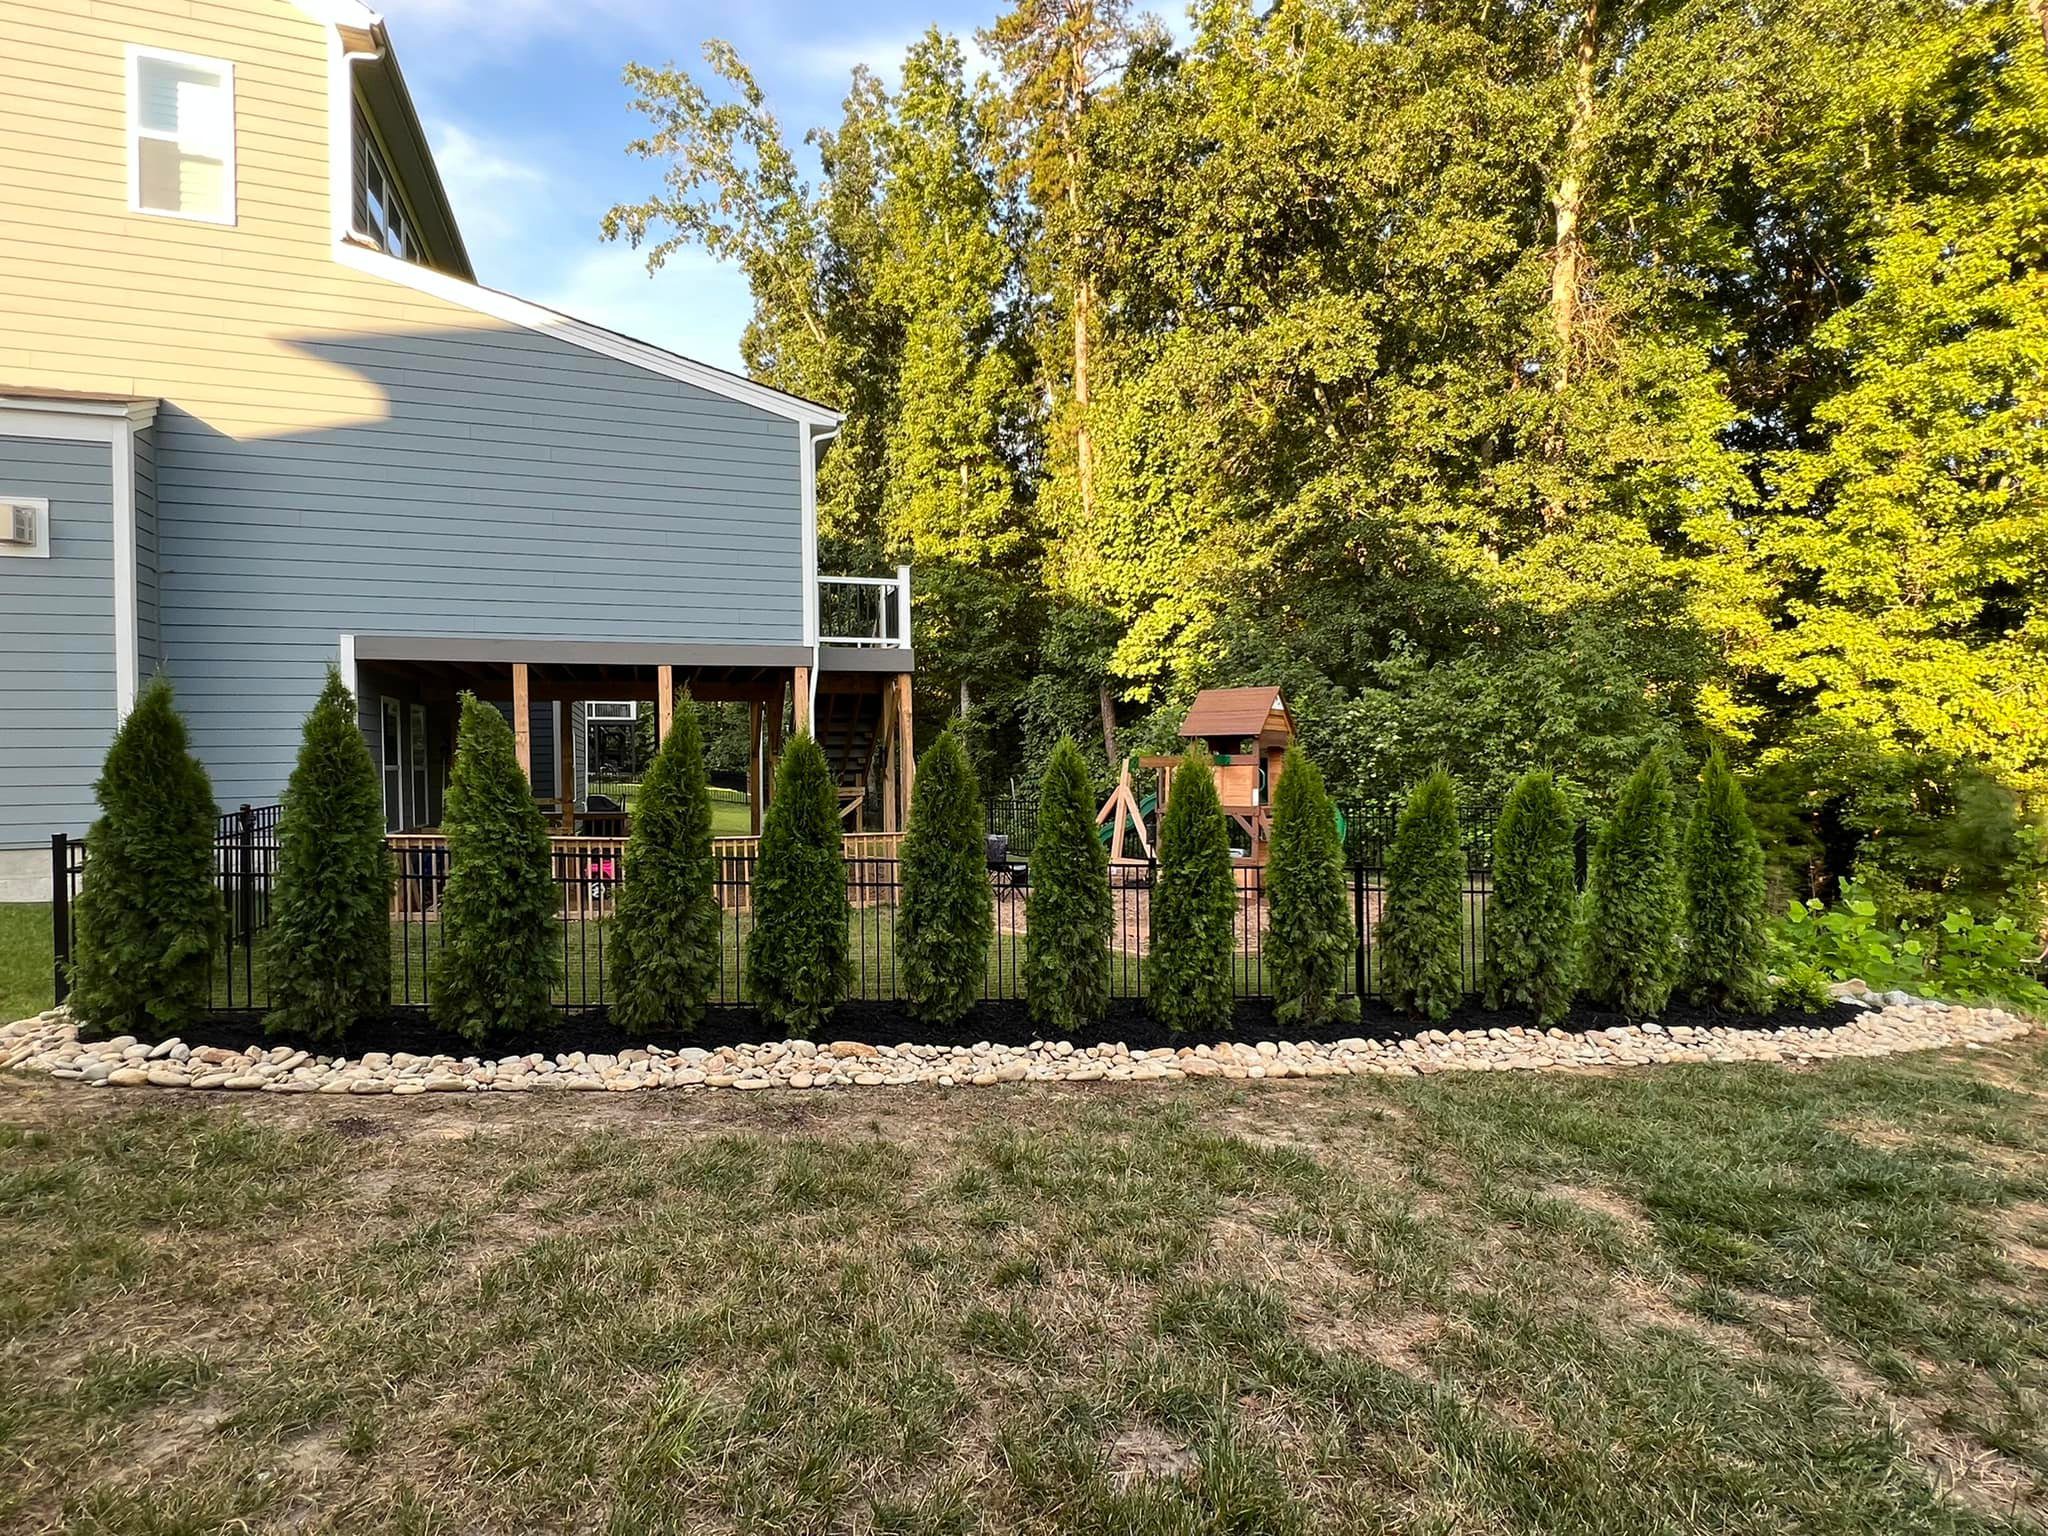 Emerald Green Arborvitae Trees 🌲 🌲 🌲 - Outdoor Living Tip of the Day -  Mr. Outdoor Living